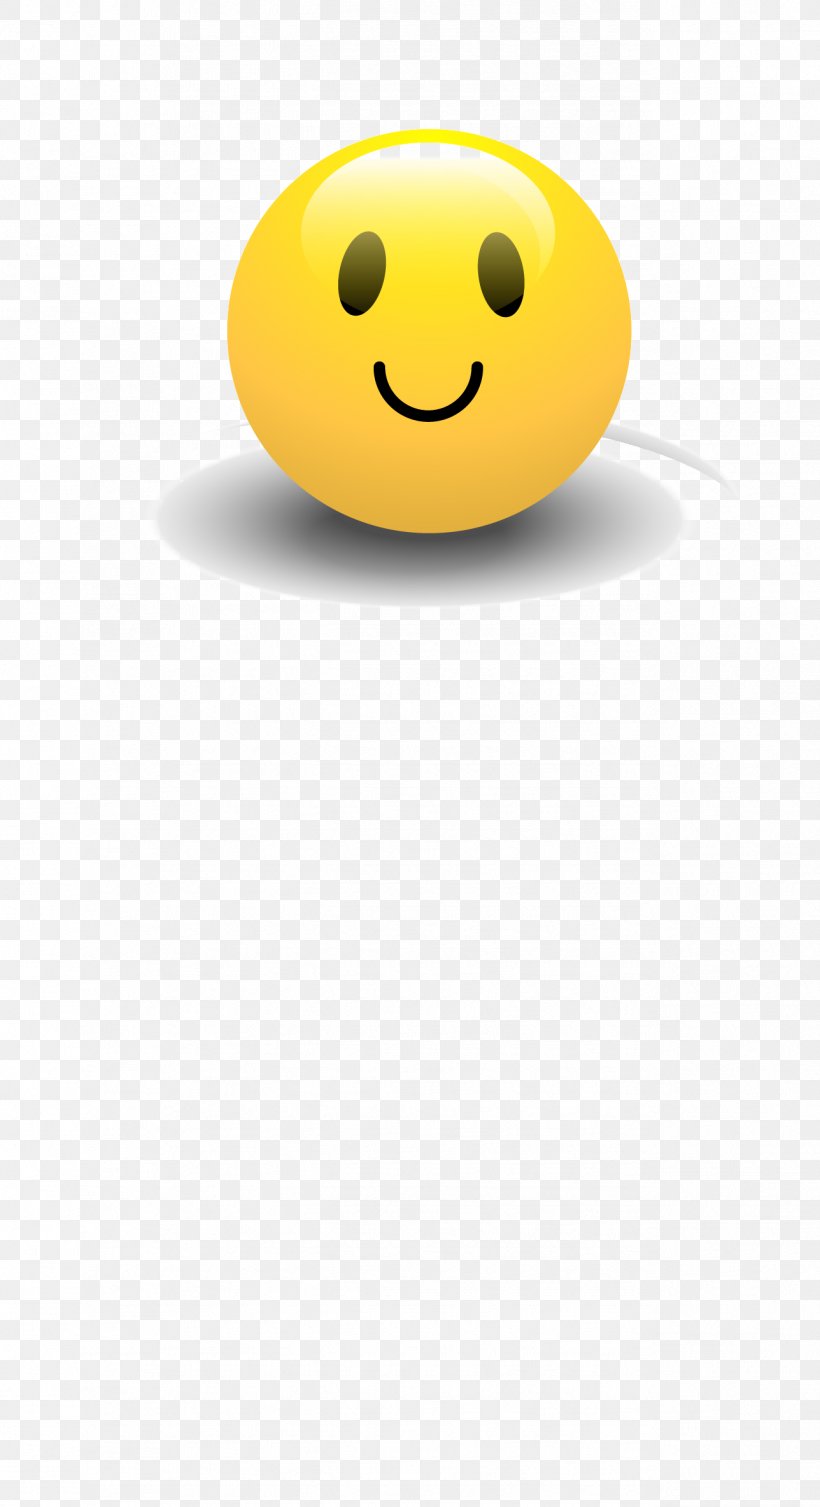 Smiley Desktop Wallpaper Computer, PNG, 1288x2368px, Smiley, Computer, Emoticon, Happiness, Smile Download Free